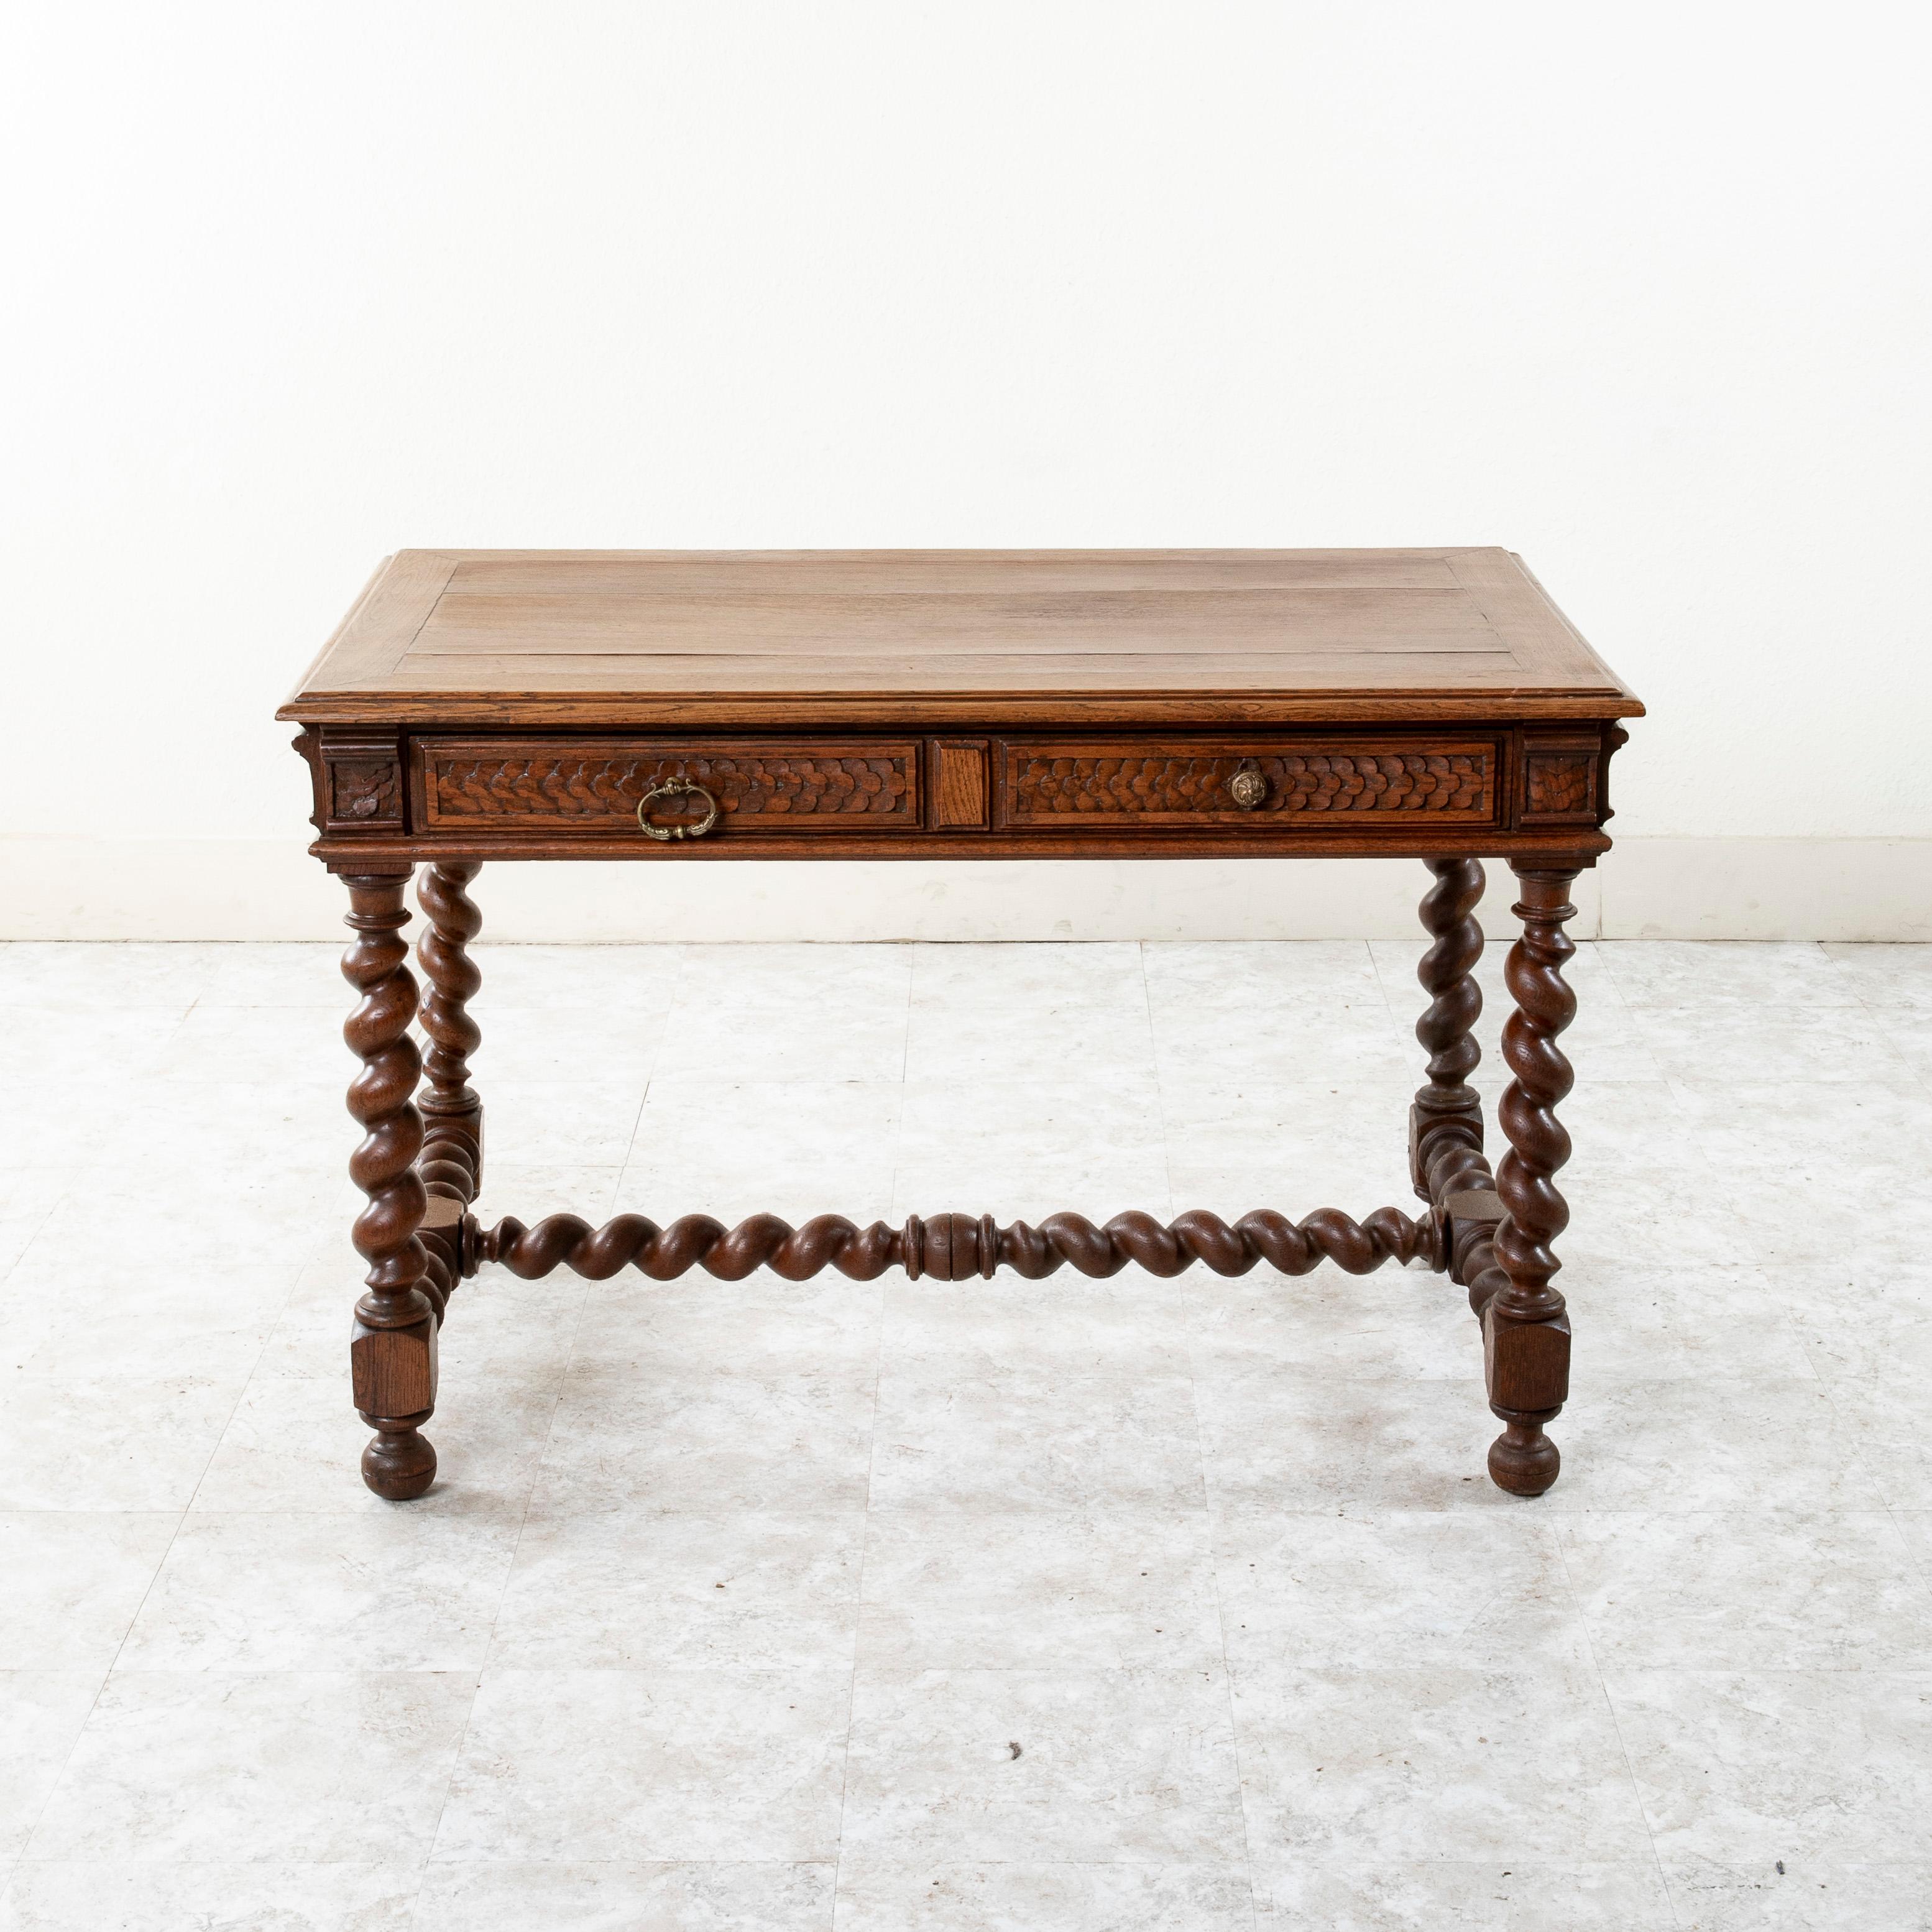 This French Louis XIII style walnut desk from the late 19th century features a beveled top and hand-carved capitals at the corners. A hand carved overlapping quatrefoil motif details each side of the piece. A long single drawer concealed in the